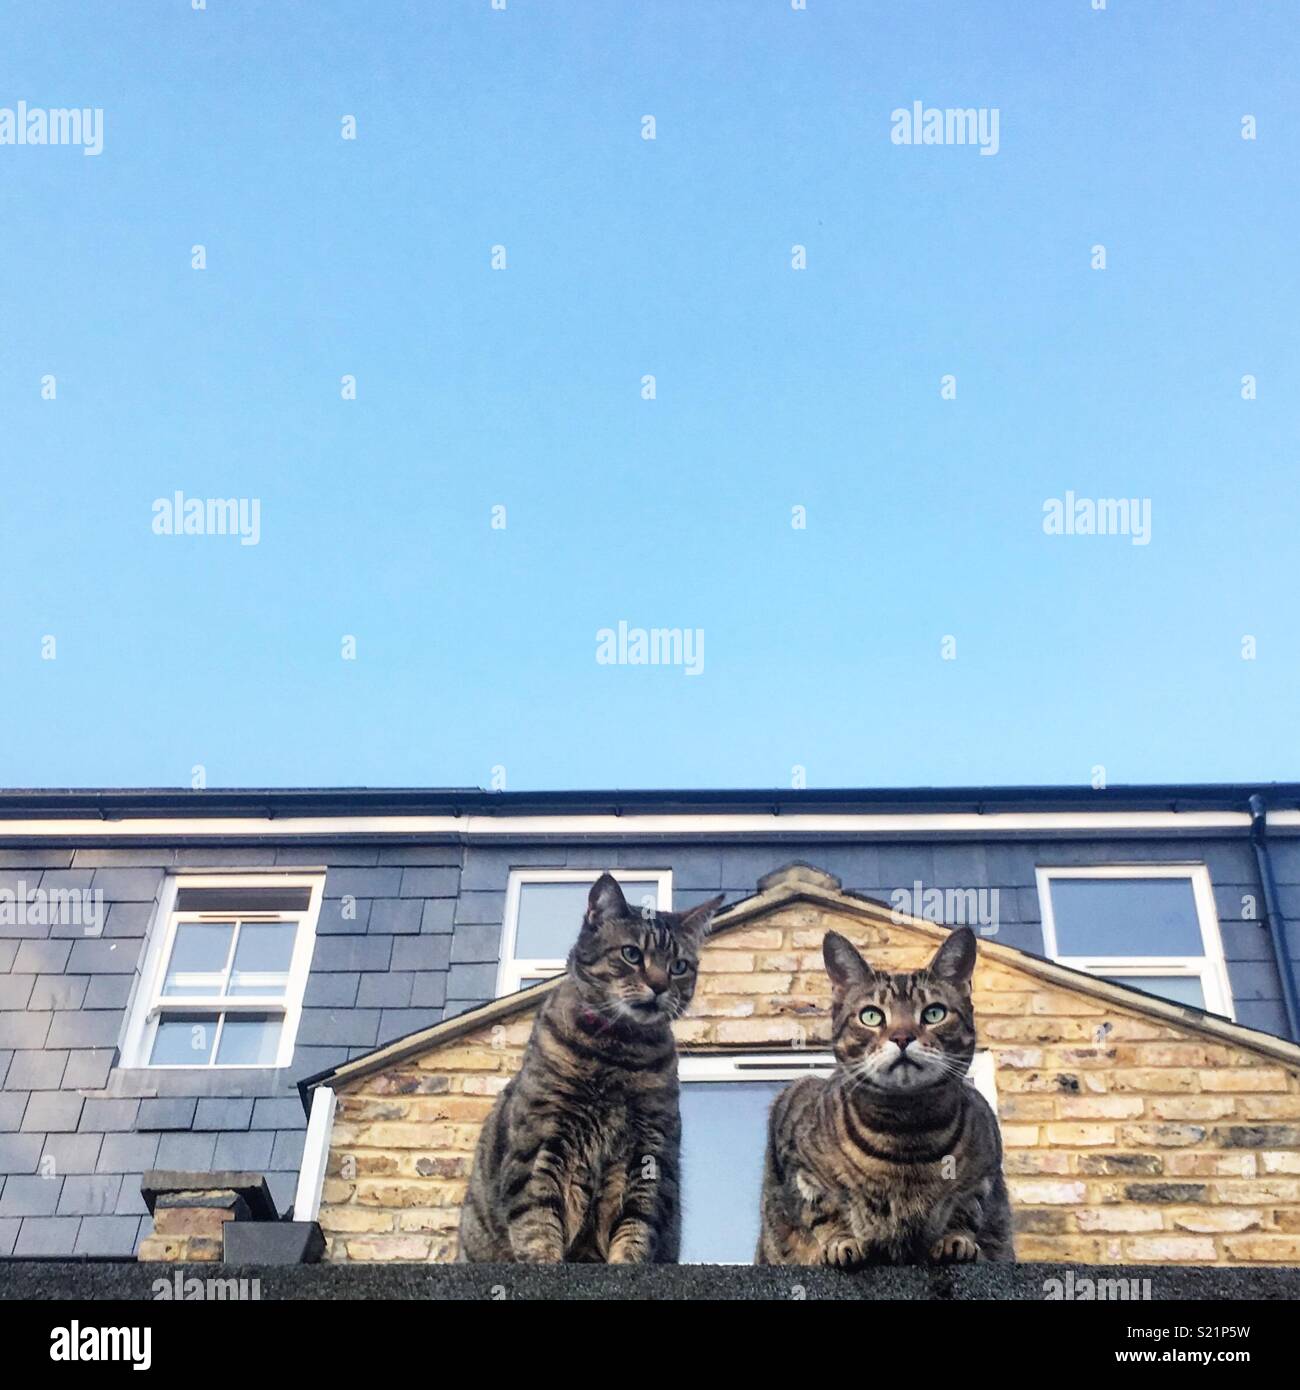 Cats on roof Stock Photo